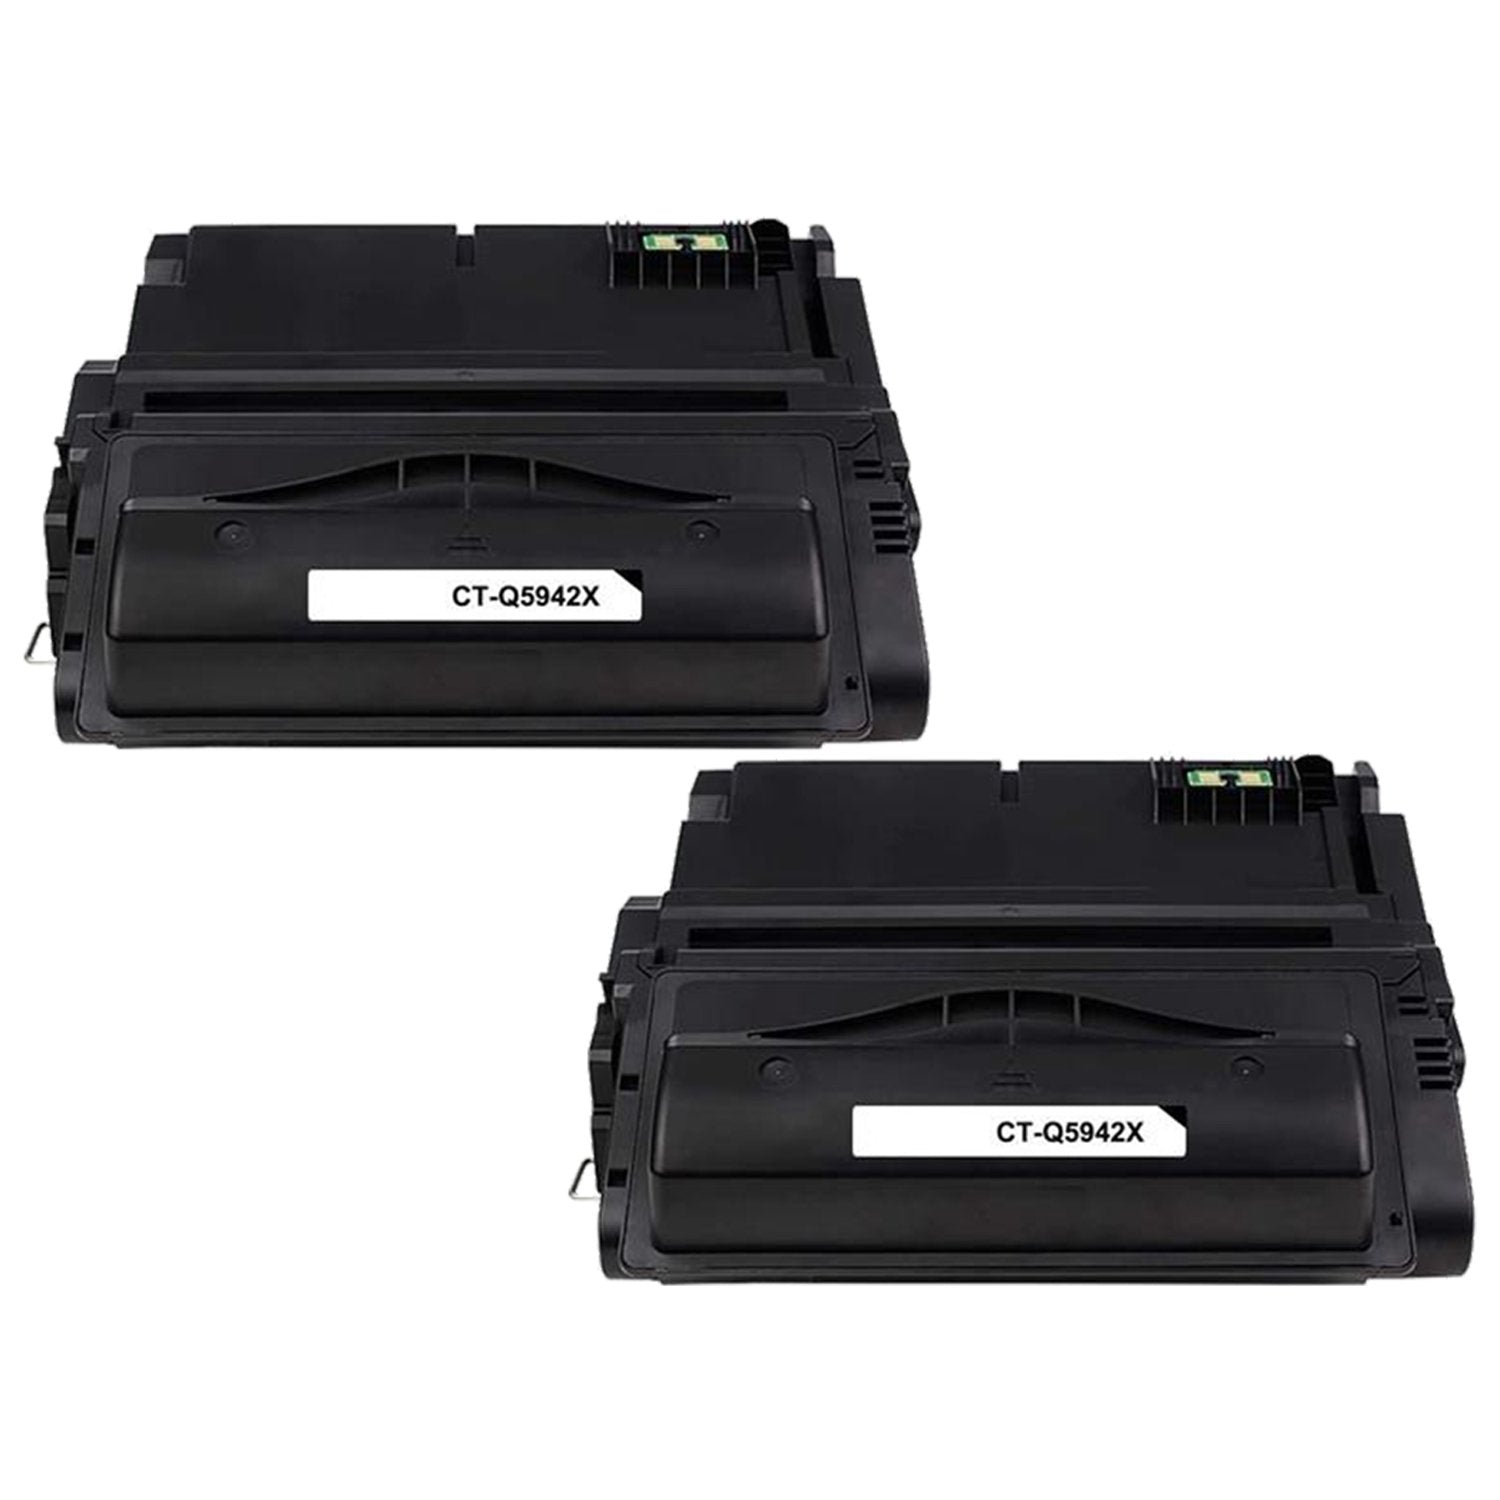 Absolute Toner Compatible Q5942X HP 42X High Yield Black Toner Cartridge | Absolute Toner HP Toner Cartridges